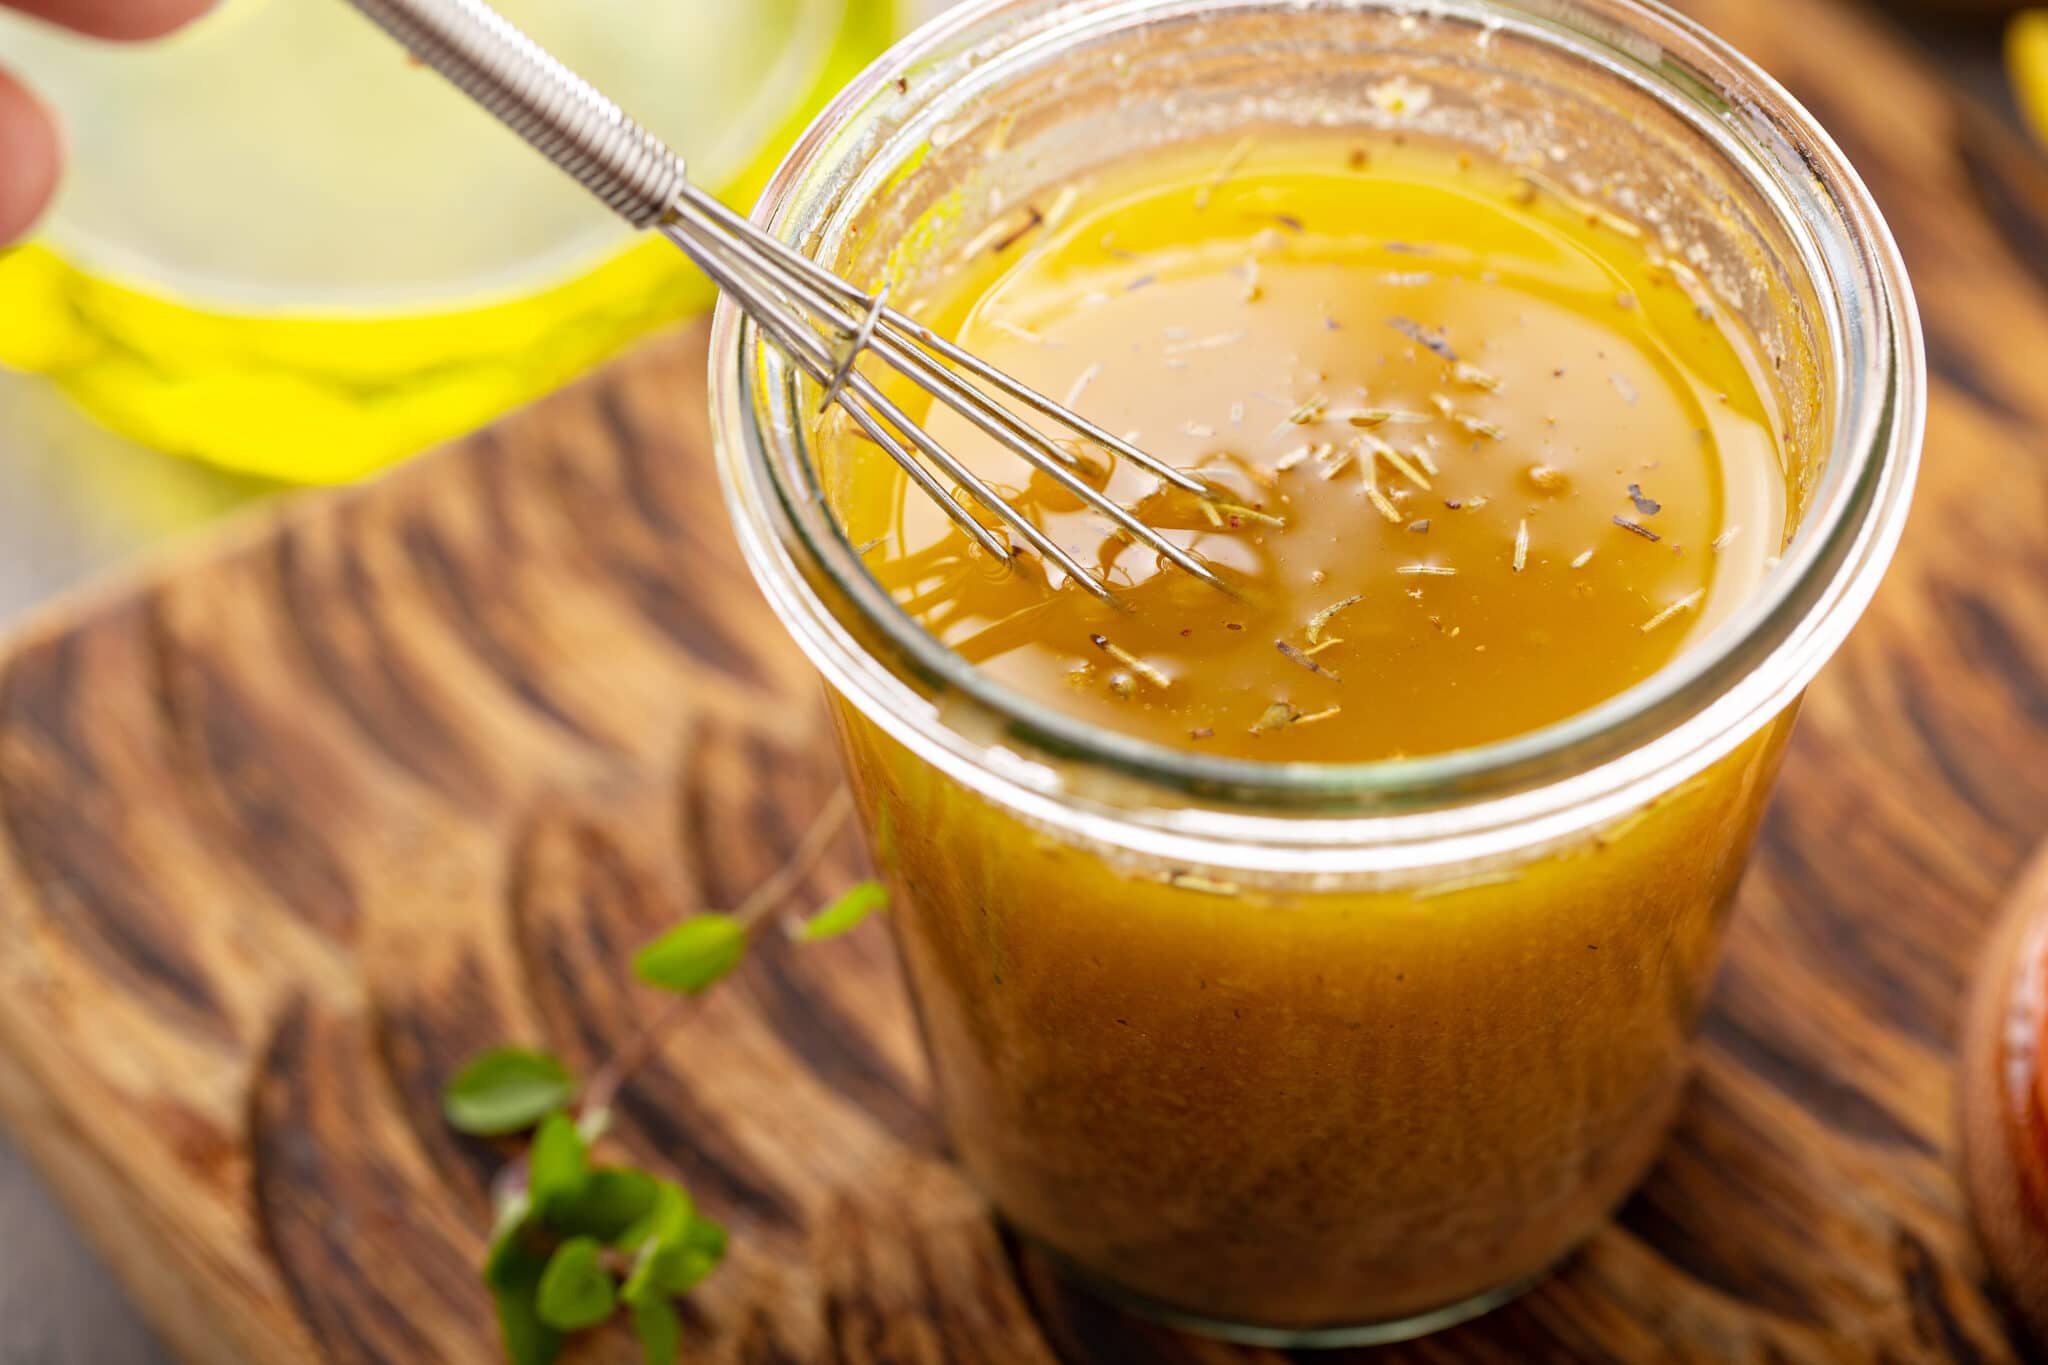 Olive oil recipes for salad dressing, nutritious and easy to prepare